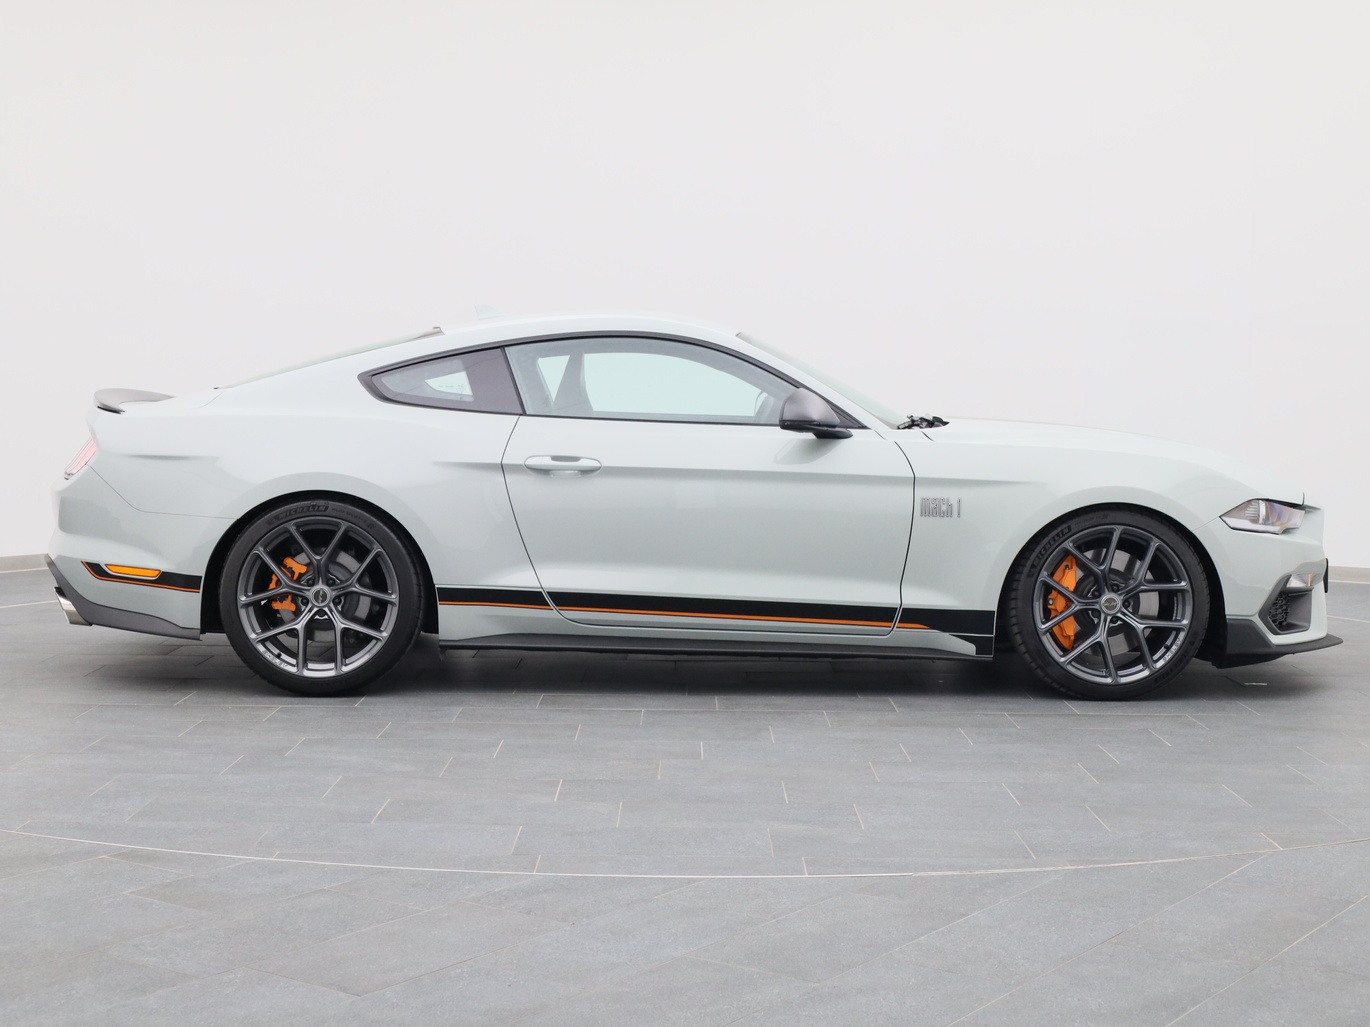  Ford Mustang Customized Mach1 750PS in Fighter Jet Gray von Rechts